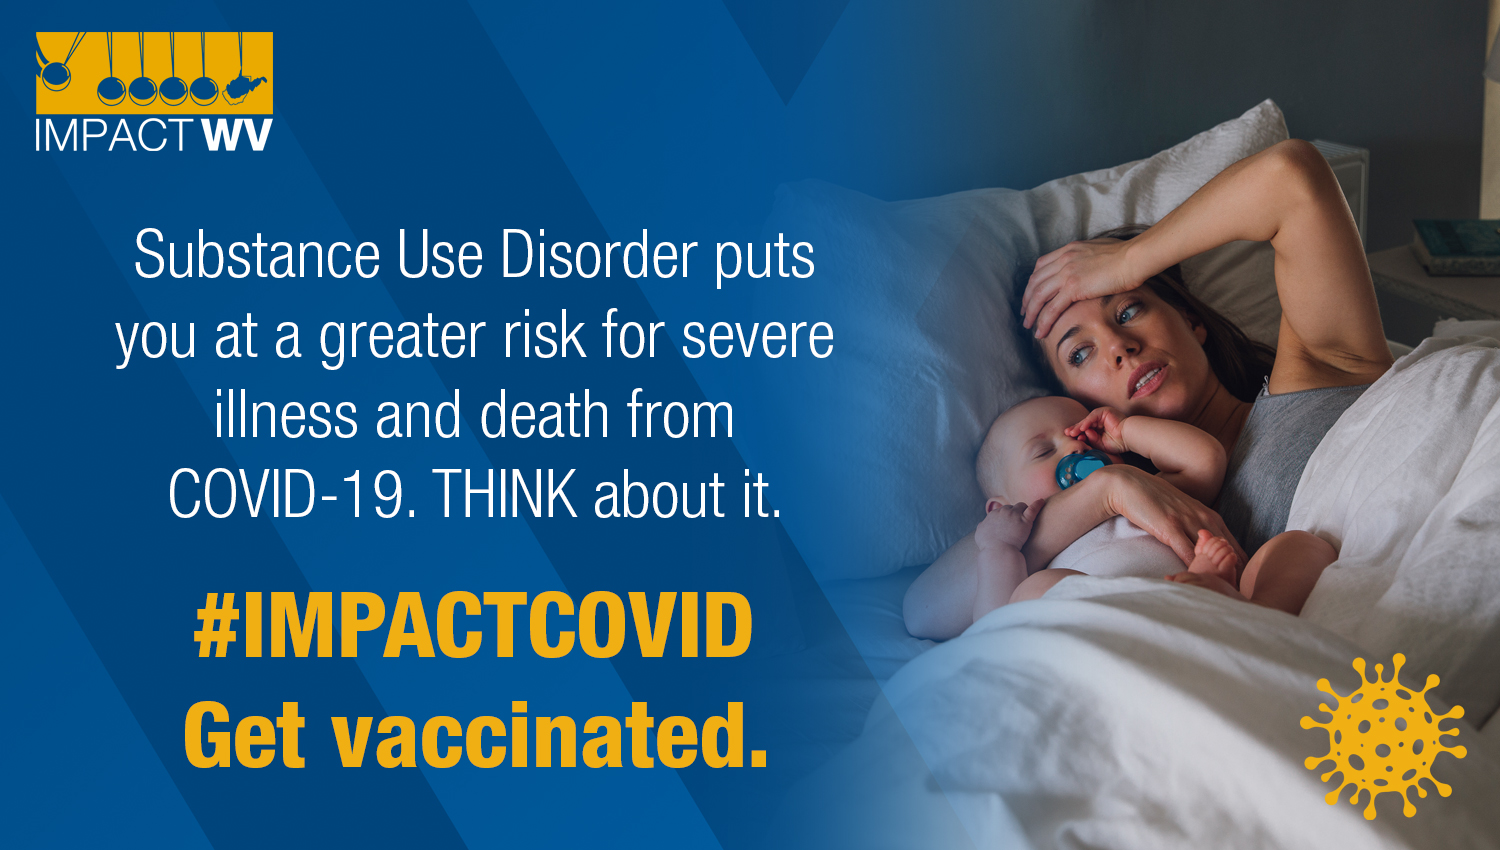 Substance Use Disorder puts you at a greater risk for severe illness and death from COVID-19. Think about it. #IMPACT Covid. Get vaccinated.